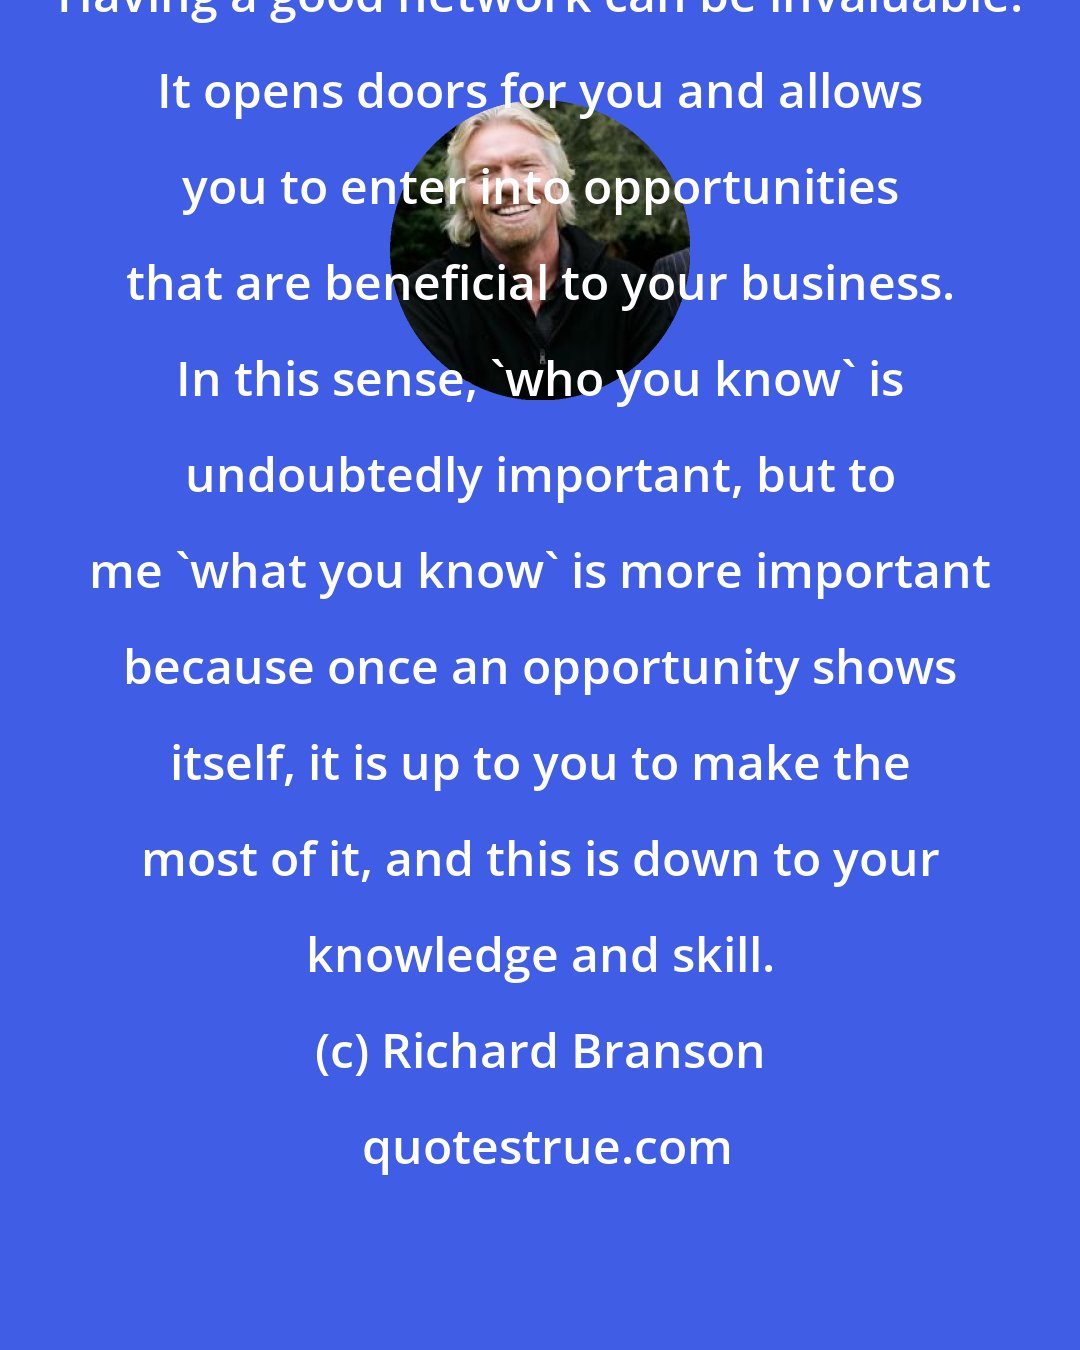 Richard Branson: Having a good network can be invaluable. It opens doors for you and allows you to enter into opportunities that are beneficial to your business. In this sense, 'who you know' is undoubtedly important, but to me 'what you know' is more important because once an opportunity shows itself, it is up to you to make the most of it, and this is down to your knowledge and skill.